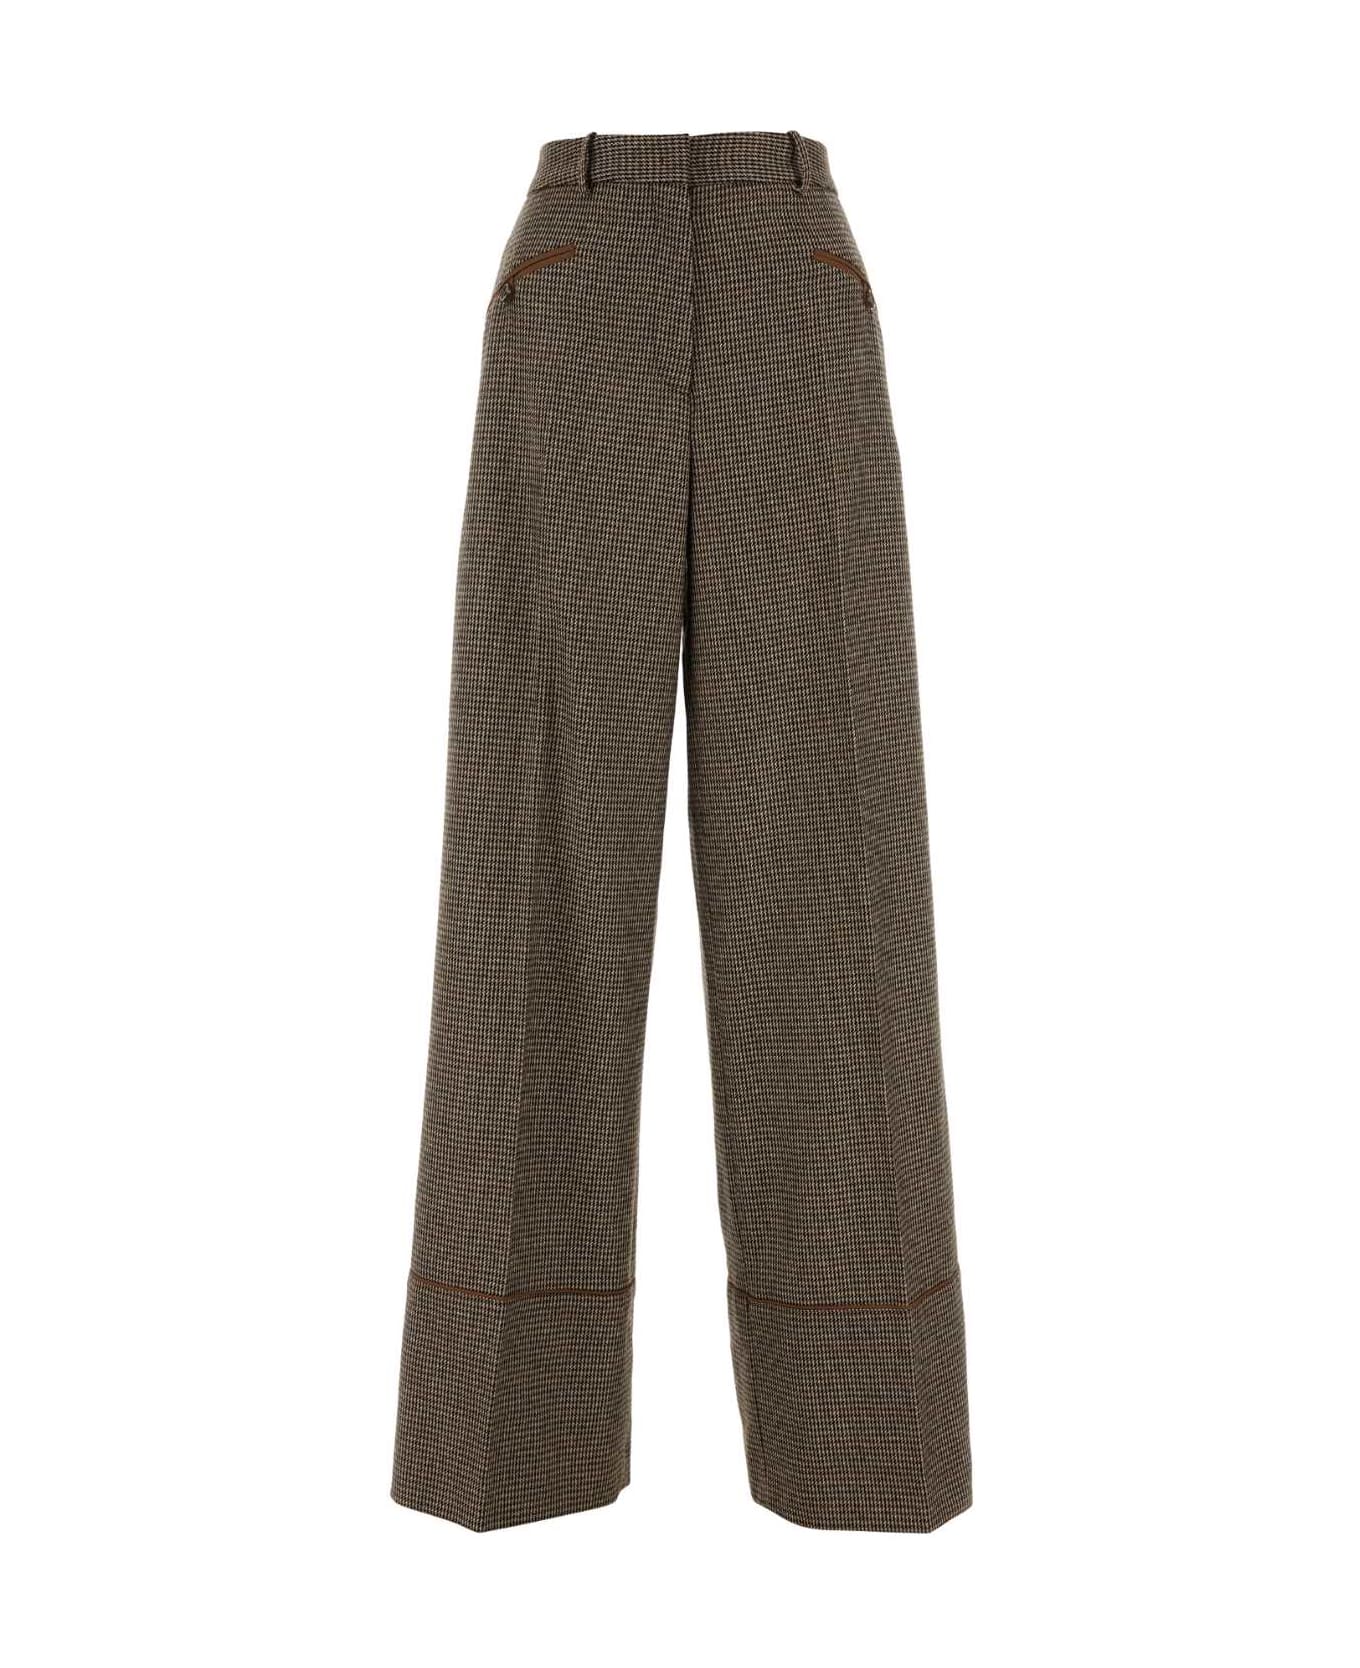 Bally Embroidered Stretch Wool Blend Wide-leg Pant - I8D5